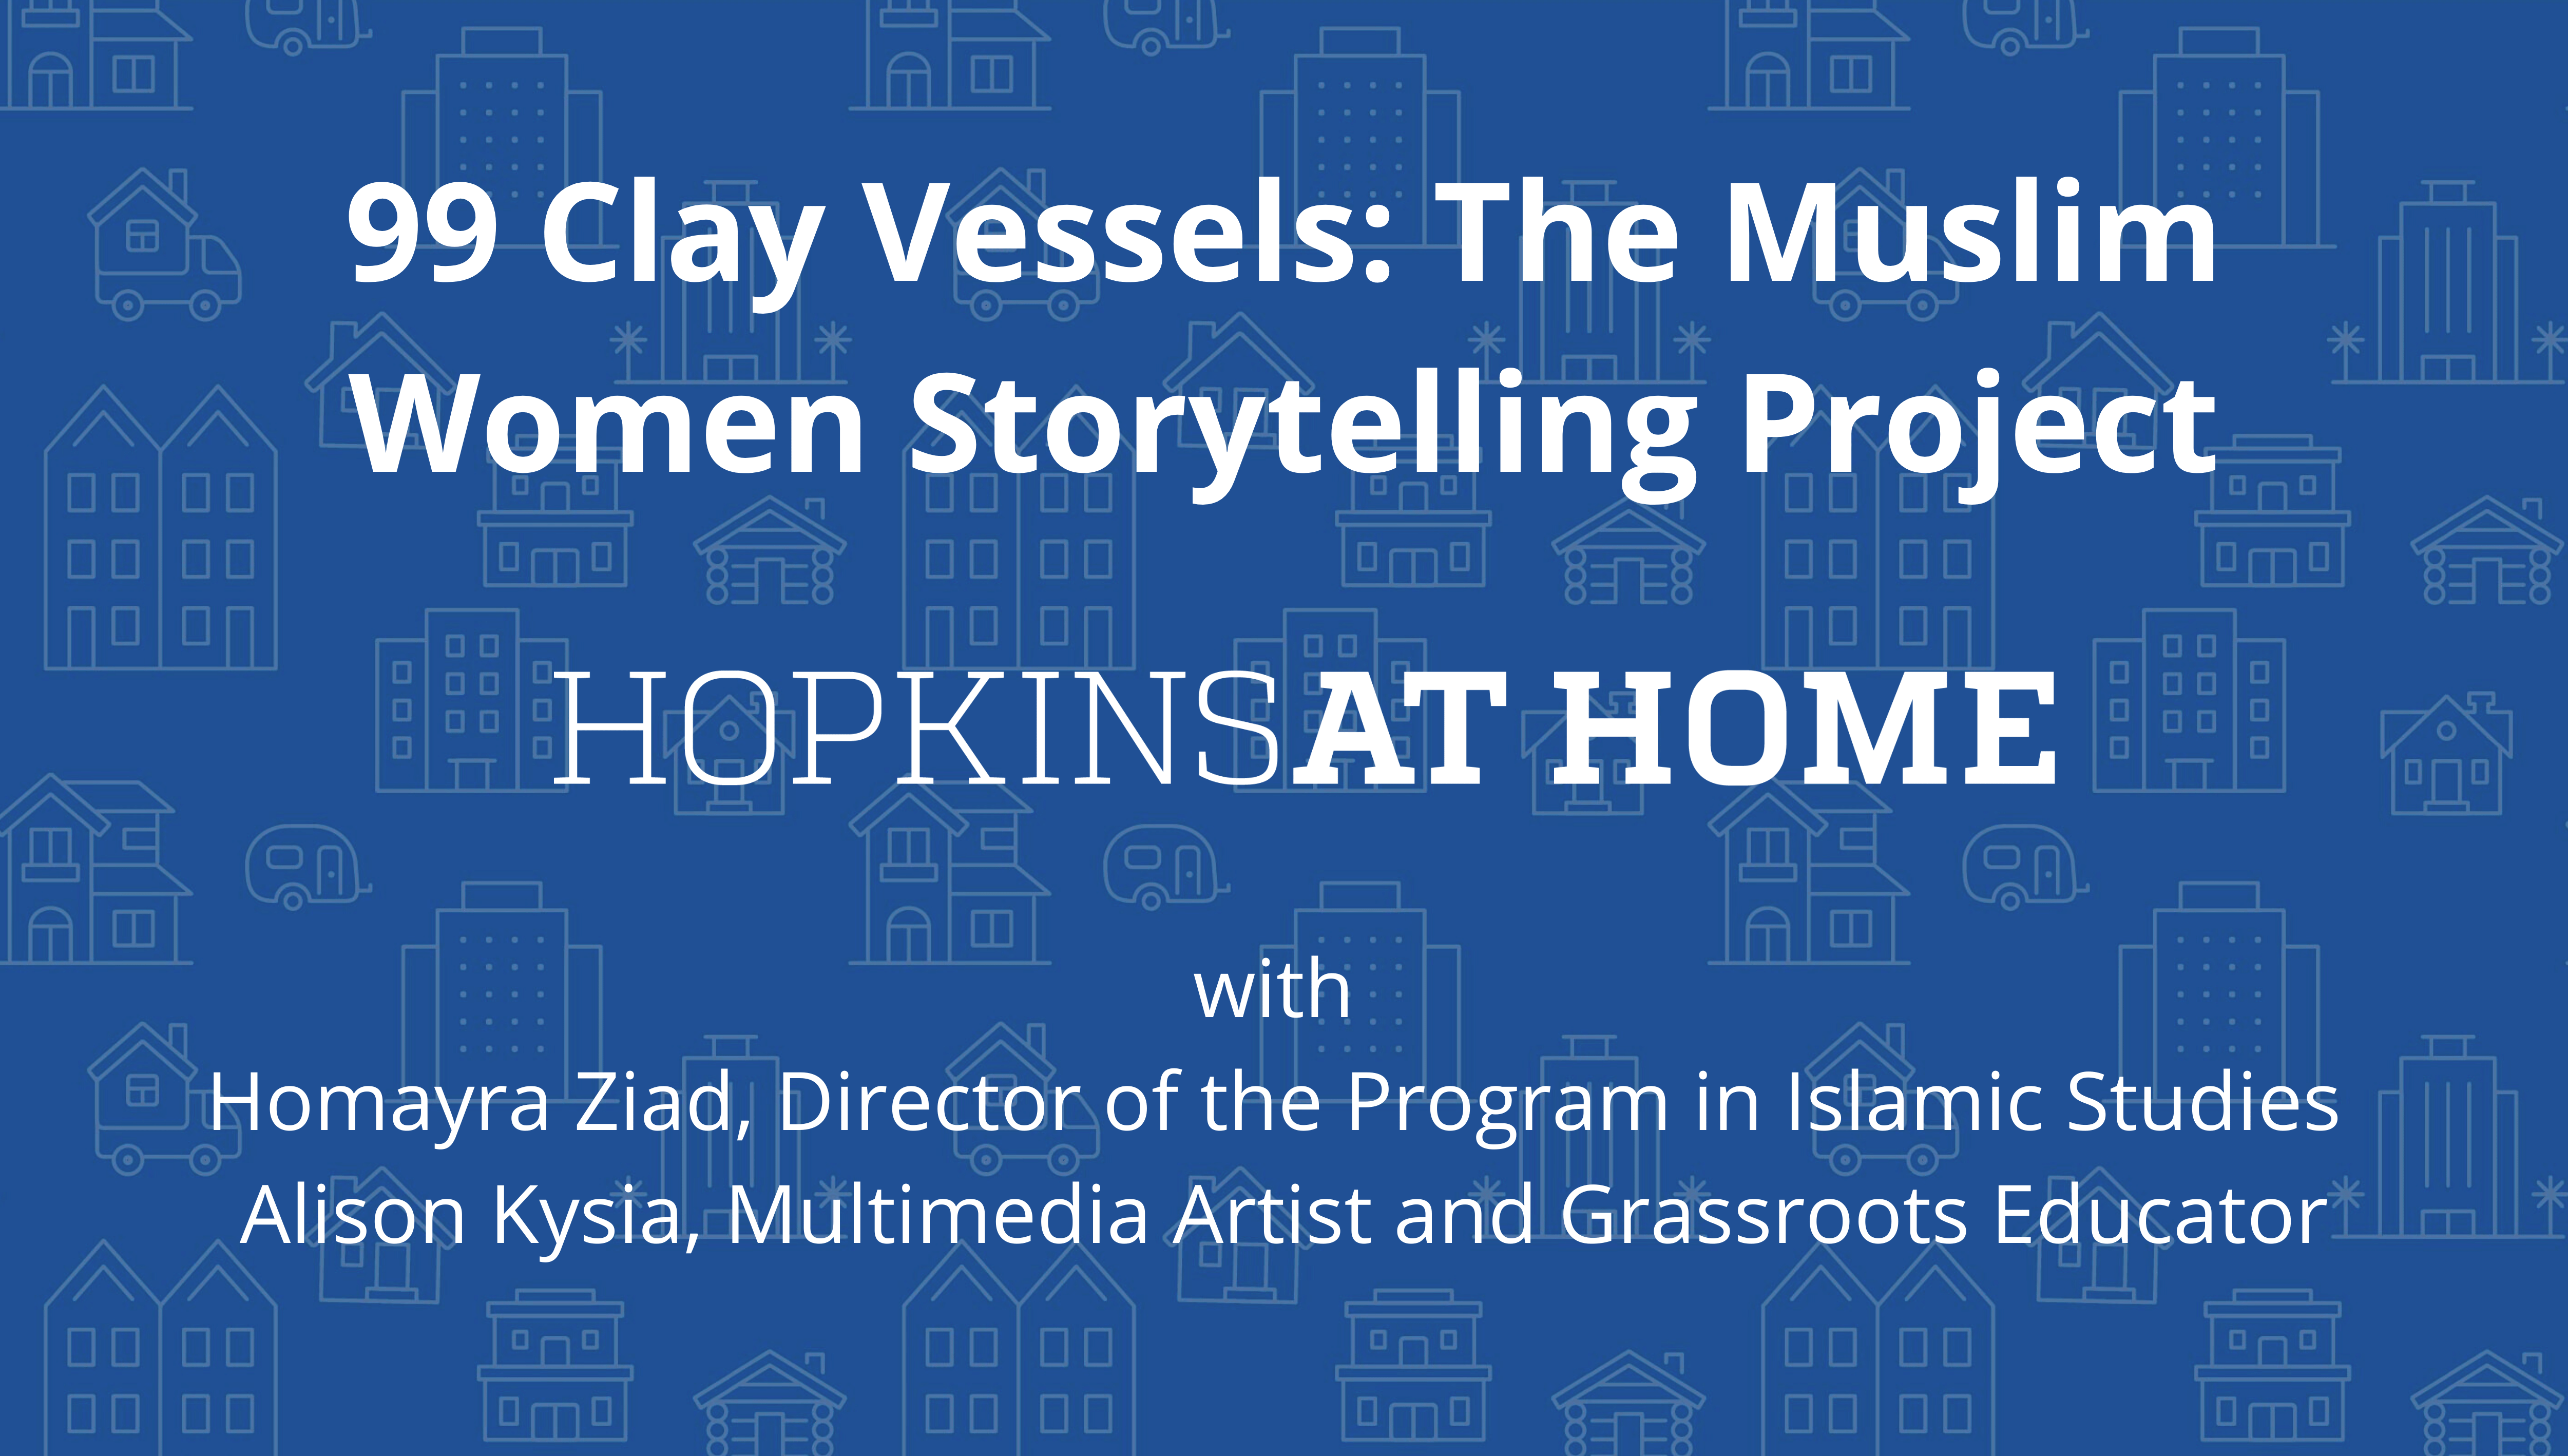 99 Clay Vessels: The Muslim Women Storytelling Project